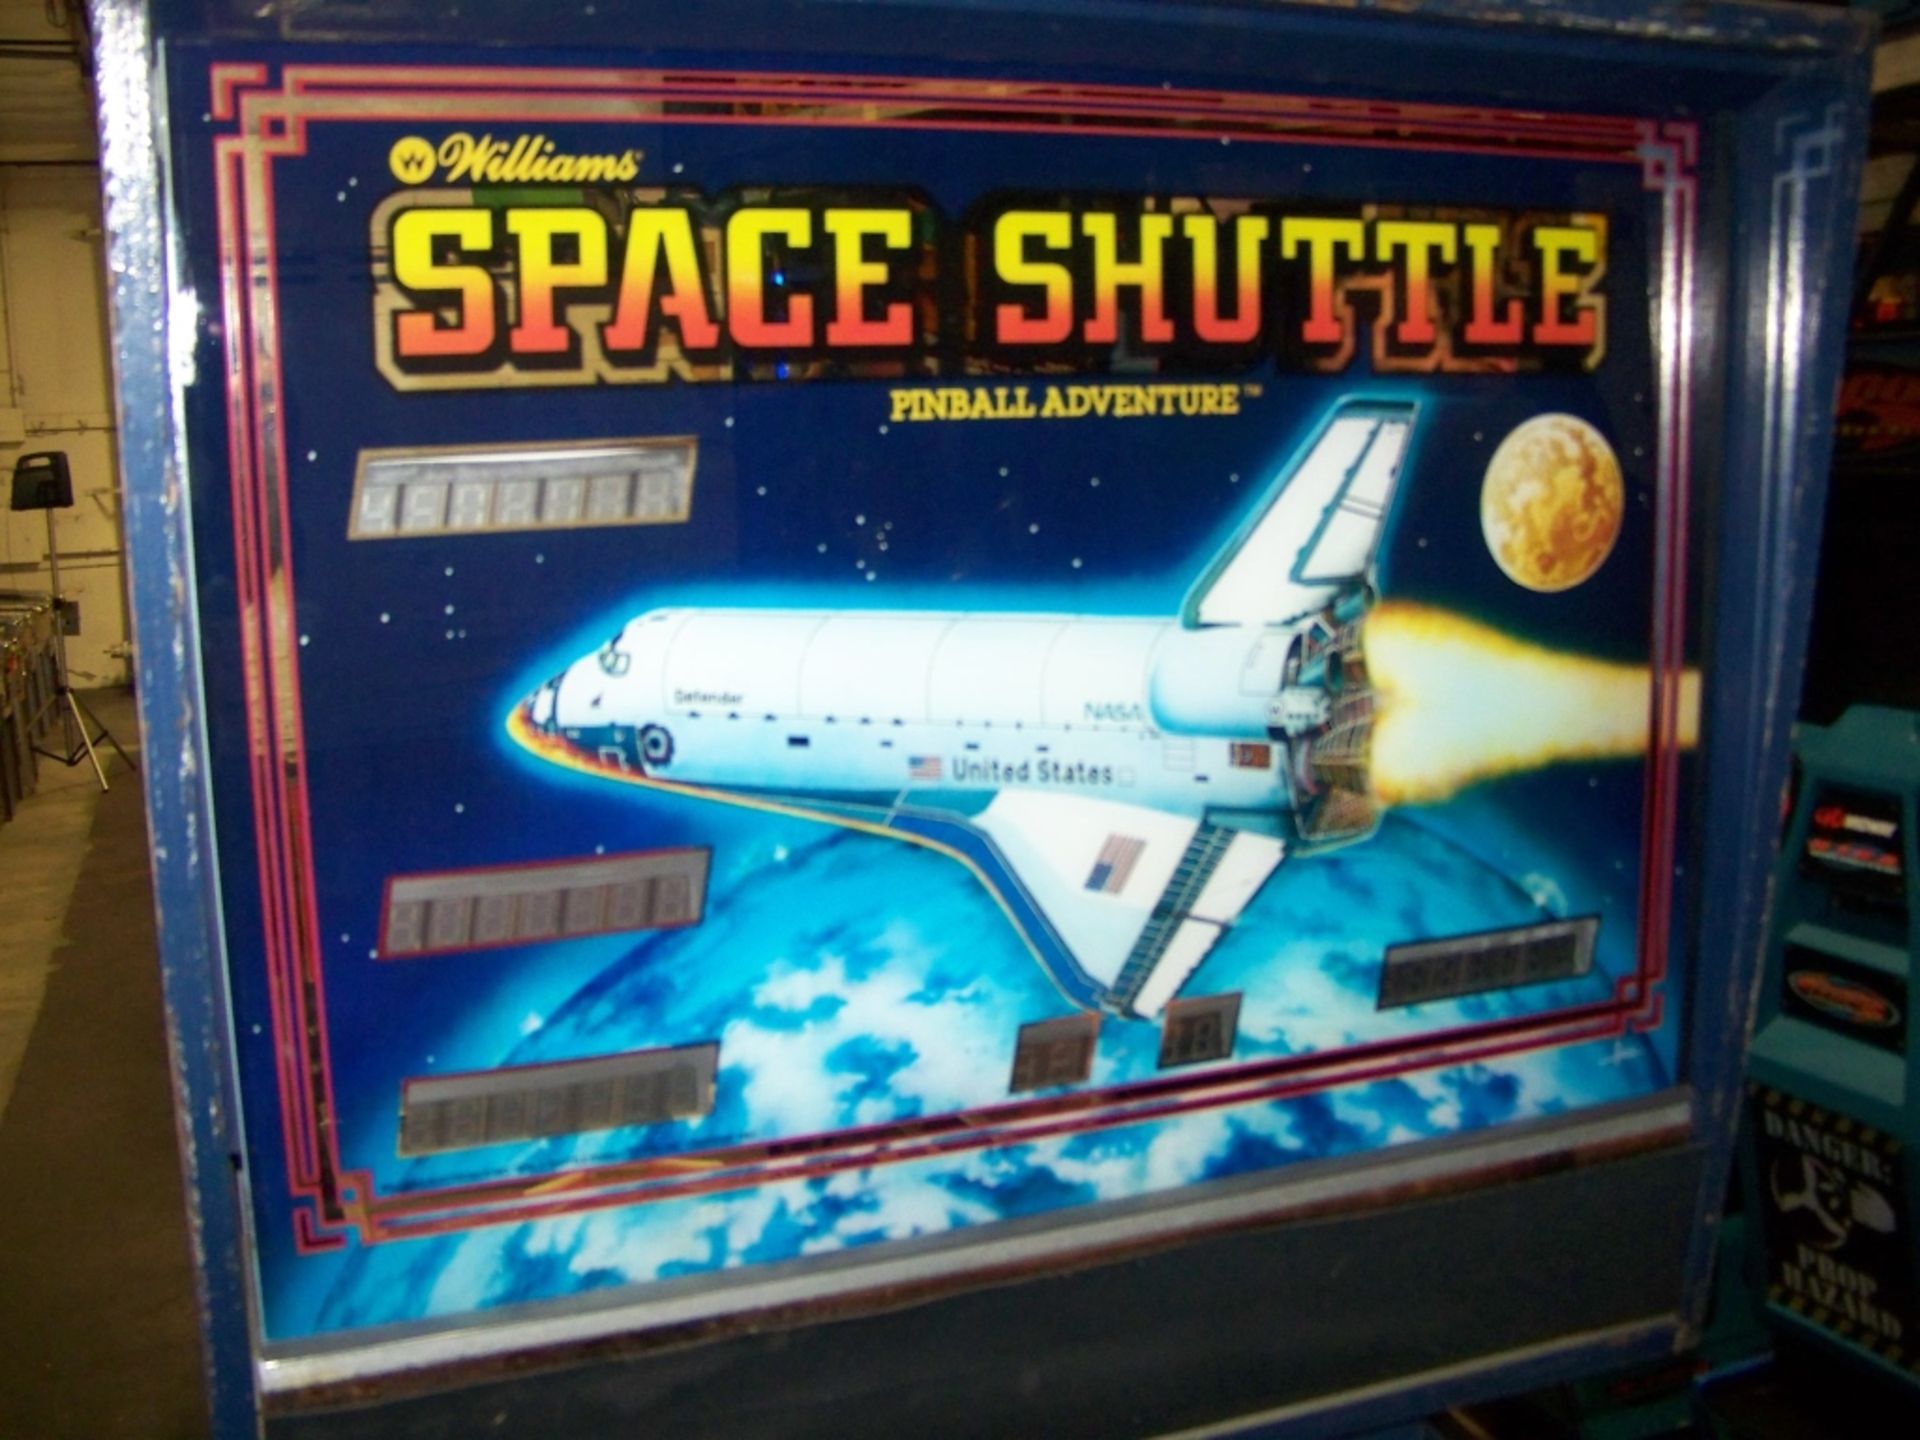 SPACE SHUTTLE PINBALL MACHINE PROJECT WILLIAMS Item is in used condition. Evidence of wear and - Image 3 of 6